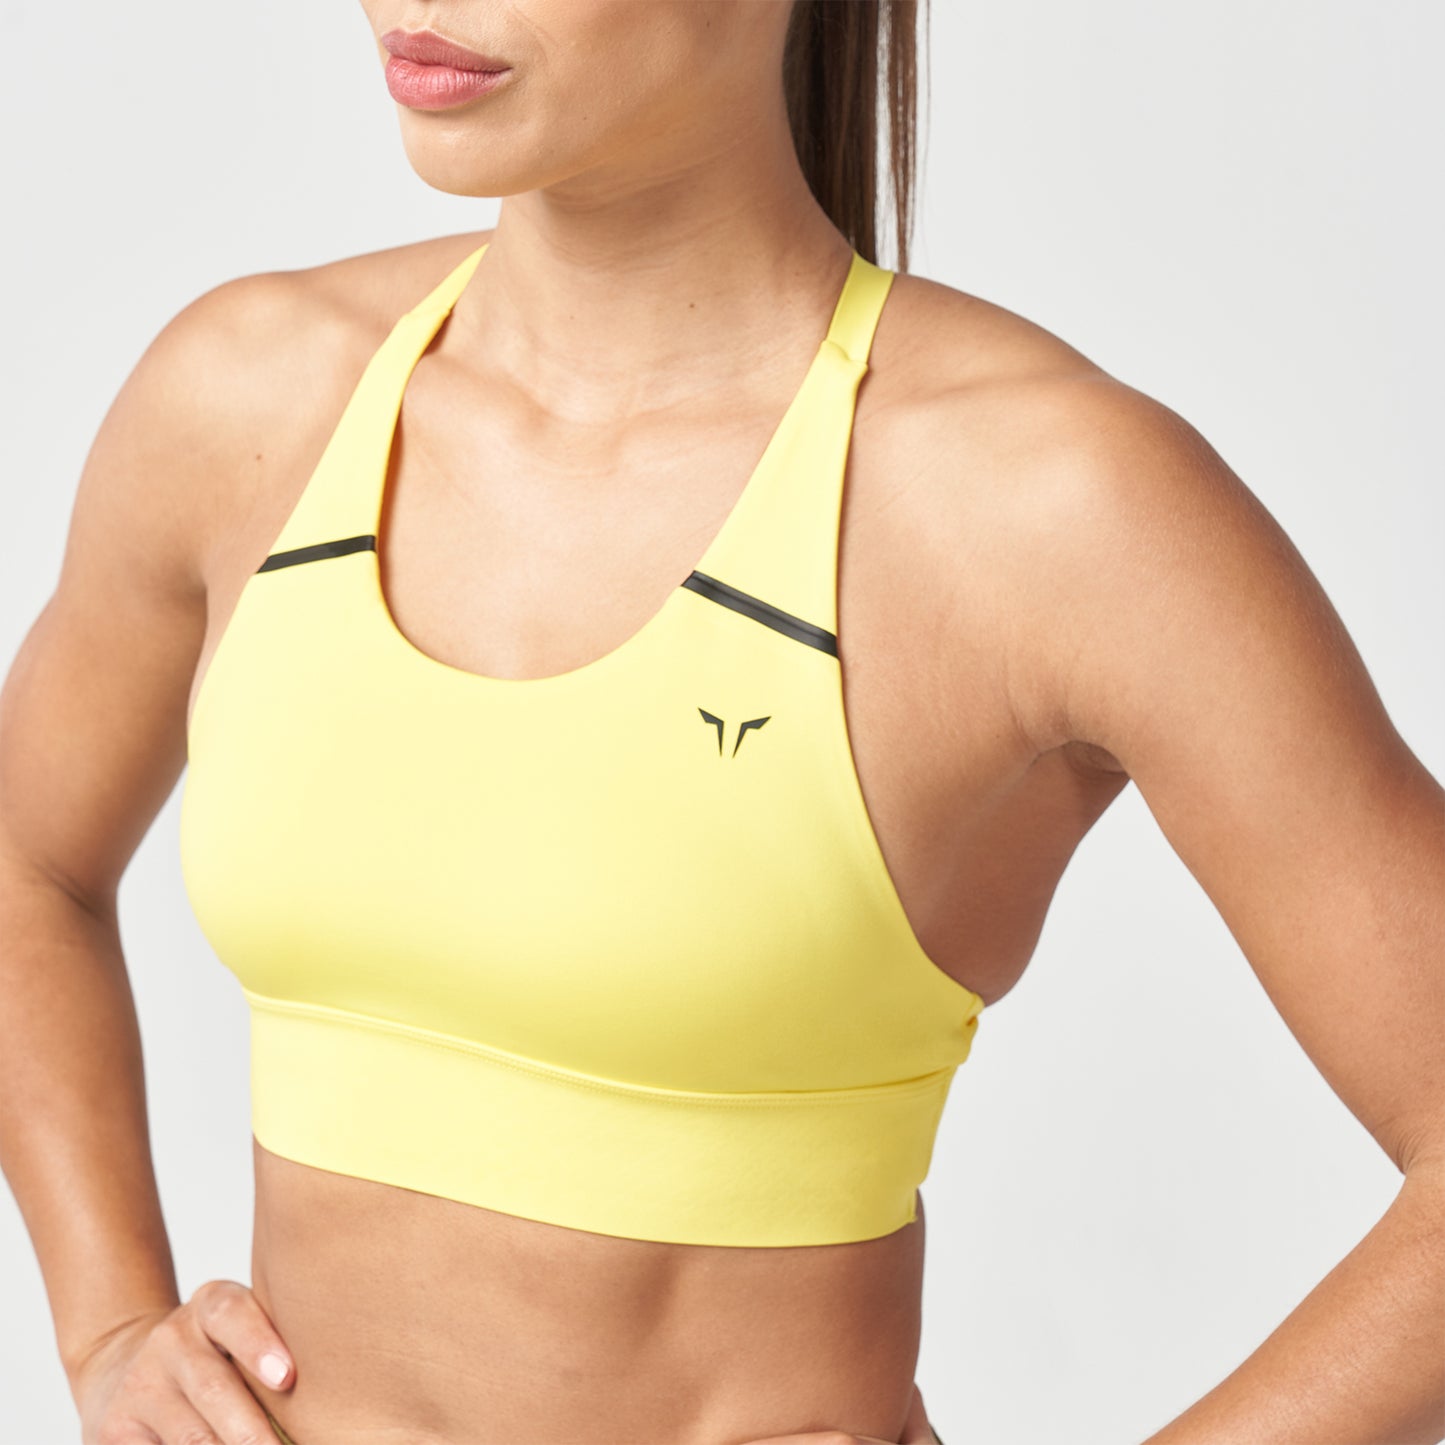 squatwolf-workout-clothes-lab360-y-back-bra-yellow-sports-bra-for-gym